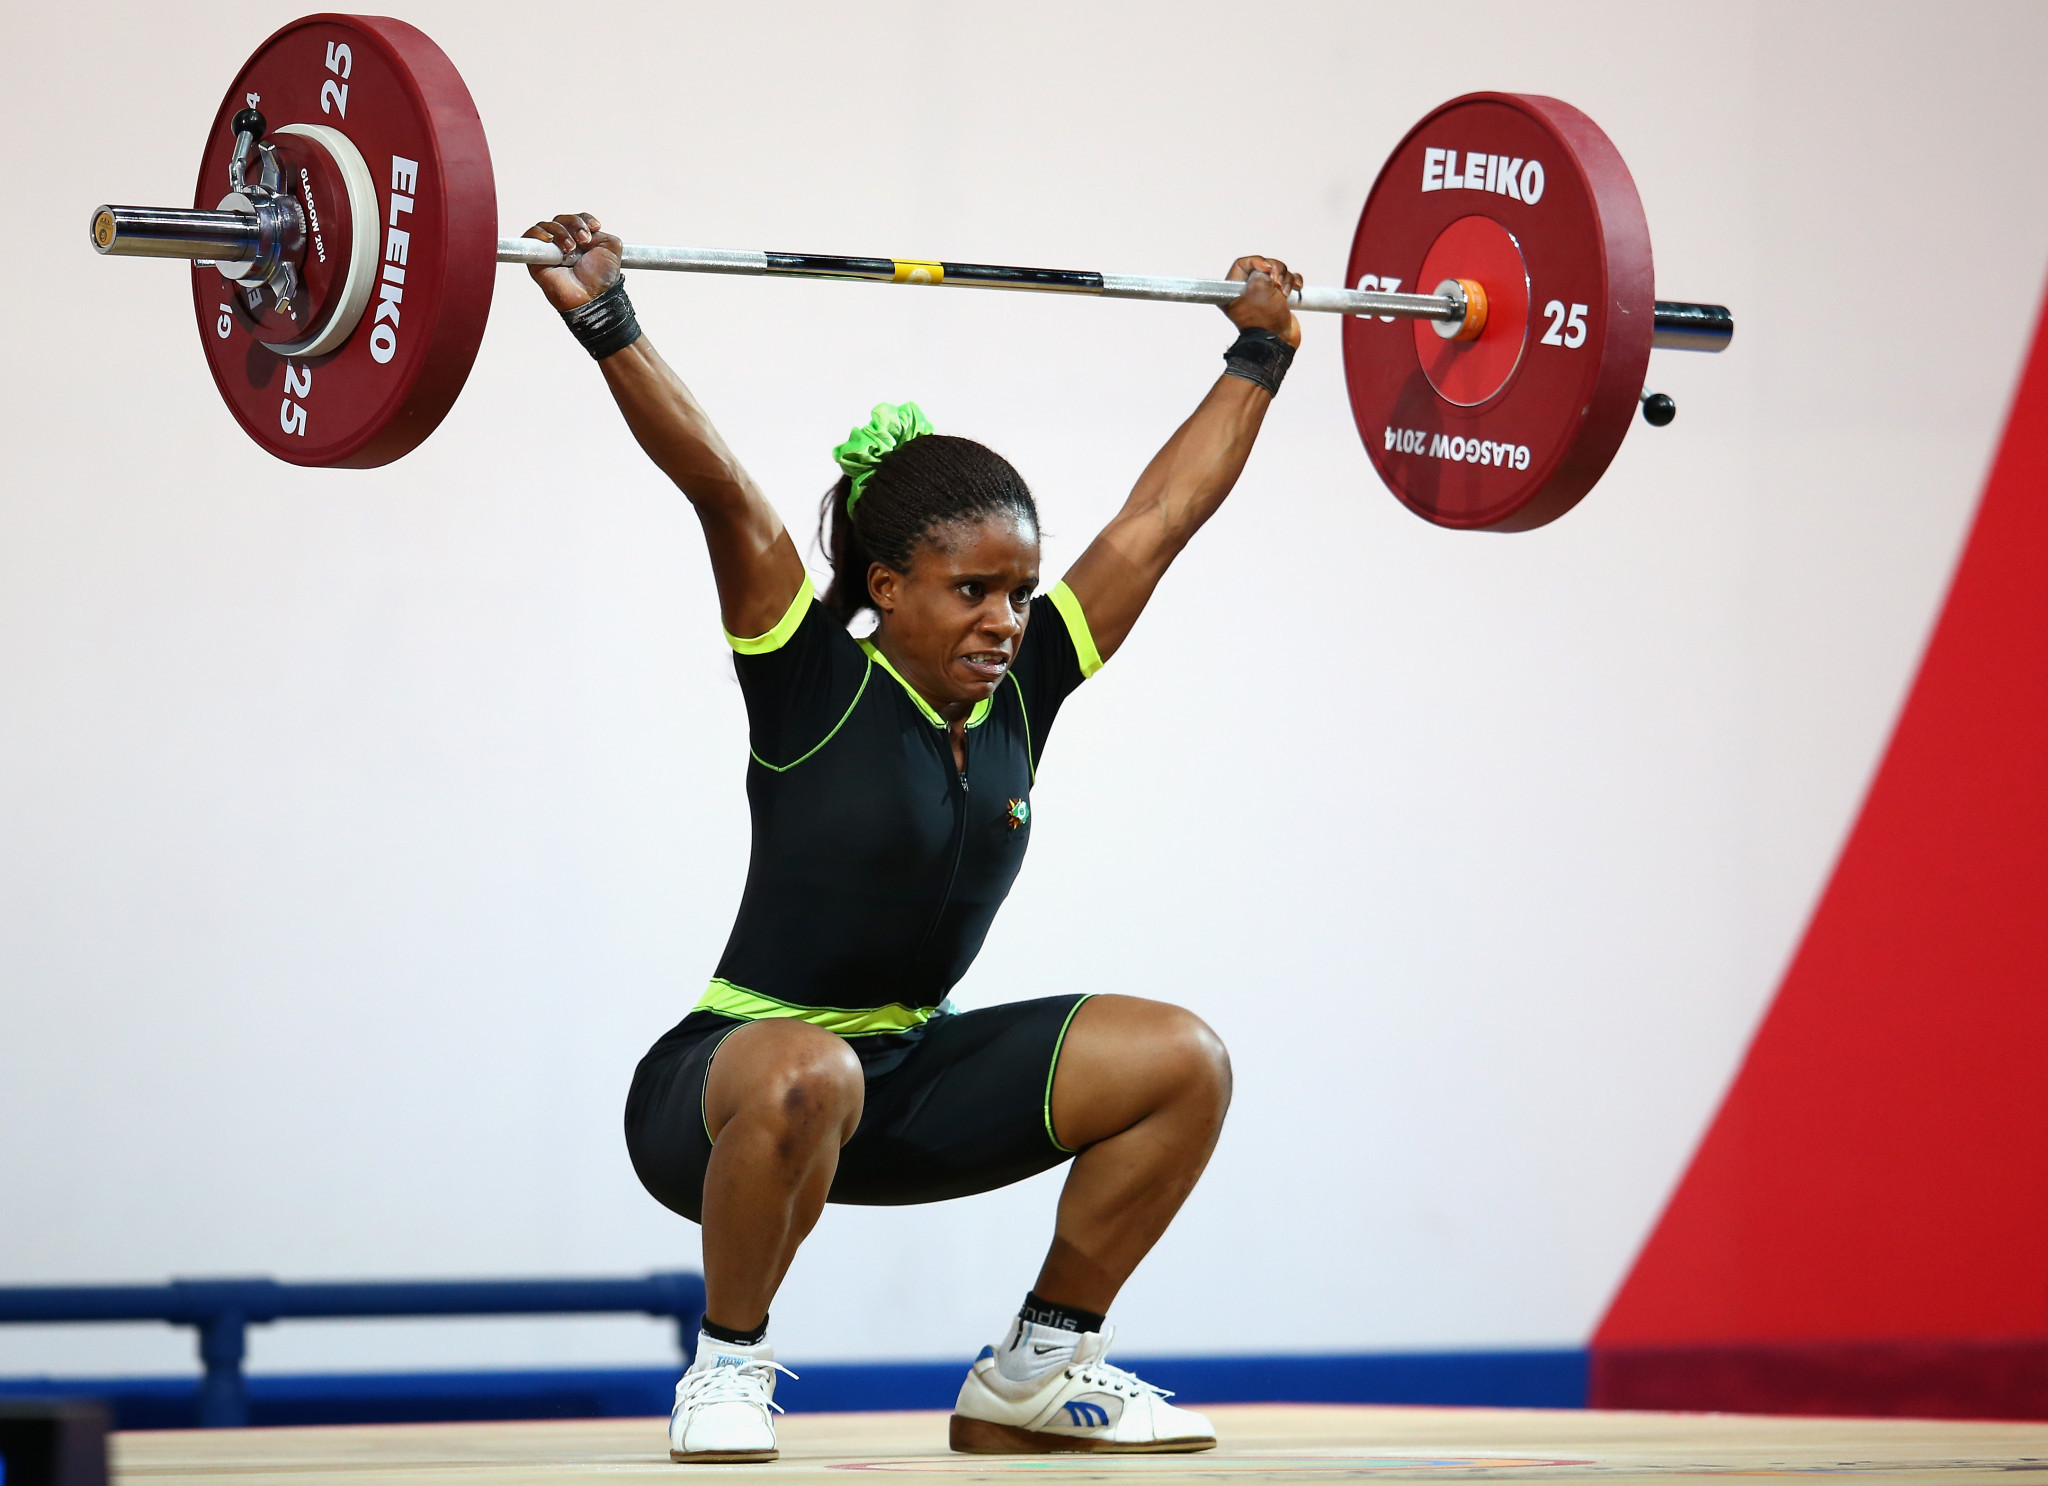 Chika Amalaha won a gold medal at Glasgow 2014, only to be subsequently be disqualified for doping ©Getty Images